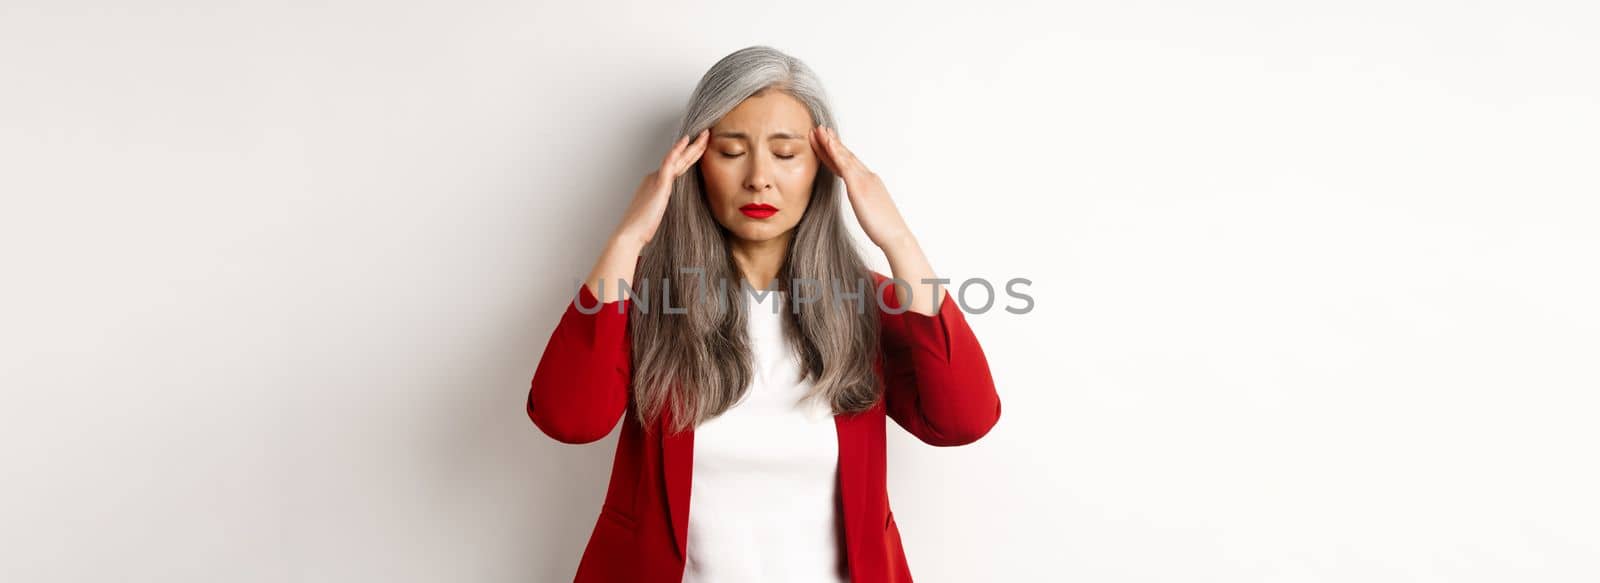 Distressed asian businesswoman trying to calm down, massaging temples on head to soothe headache, standing over white background.